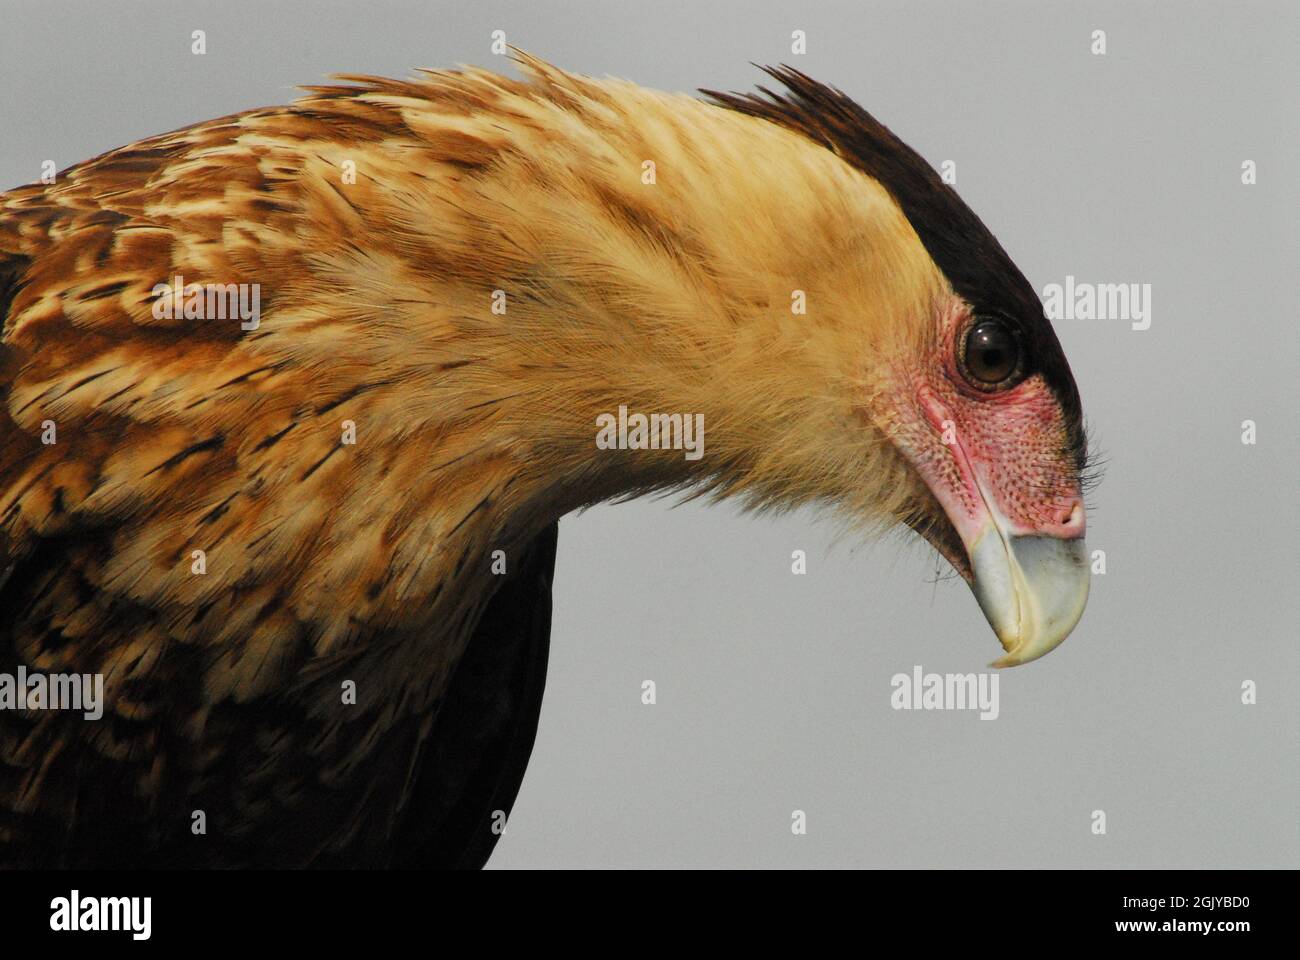 An extreme close up head shot of a beautifully colorful wild Caracara bird of prey, which is a member of the Falcon family. Stock Photo